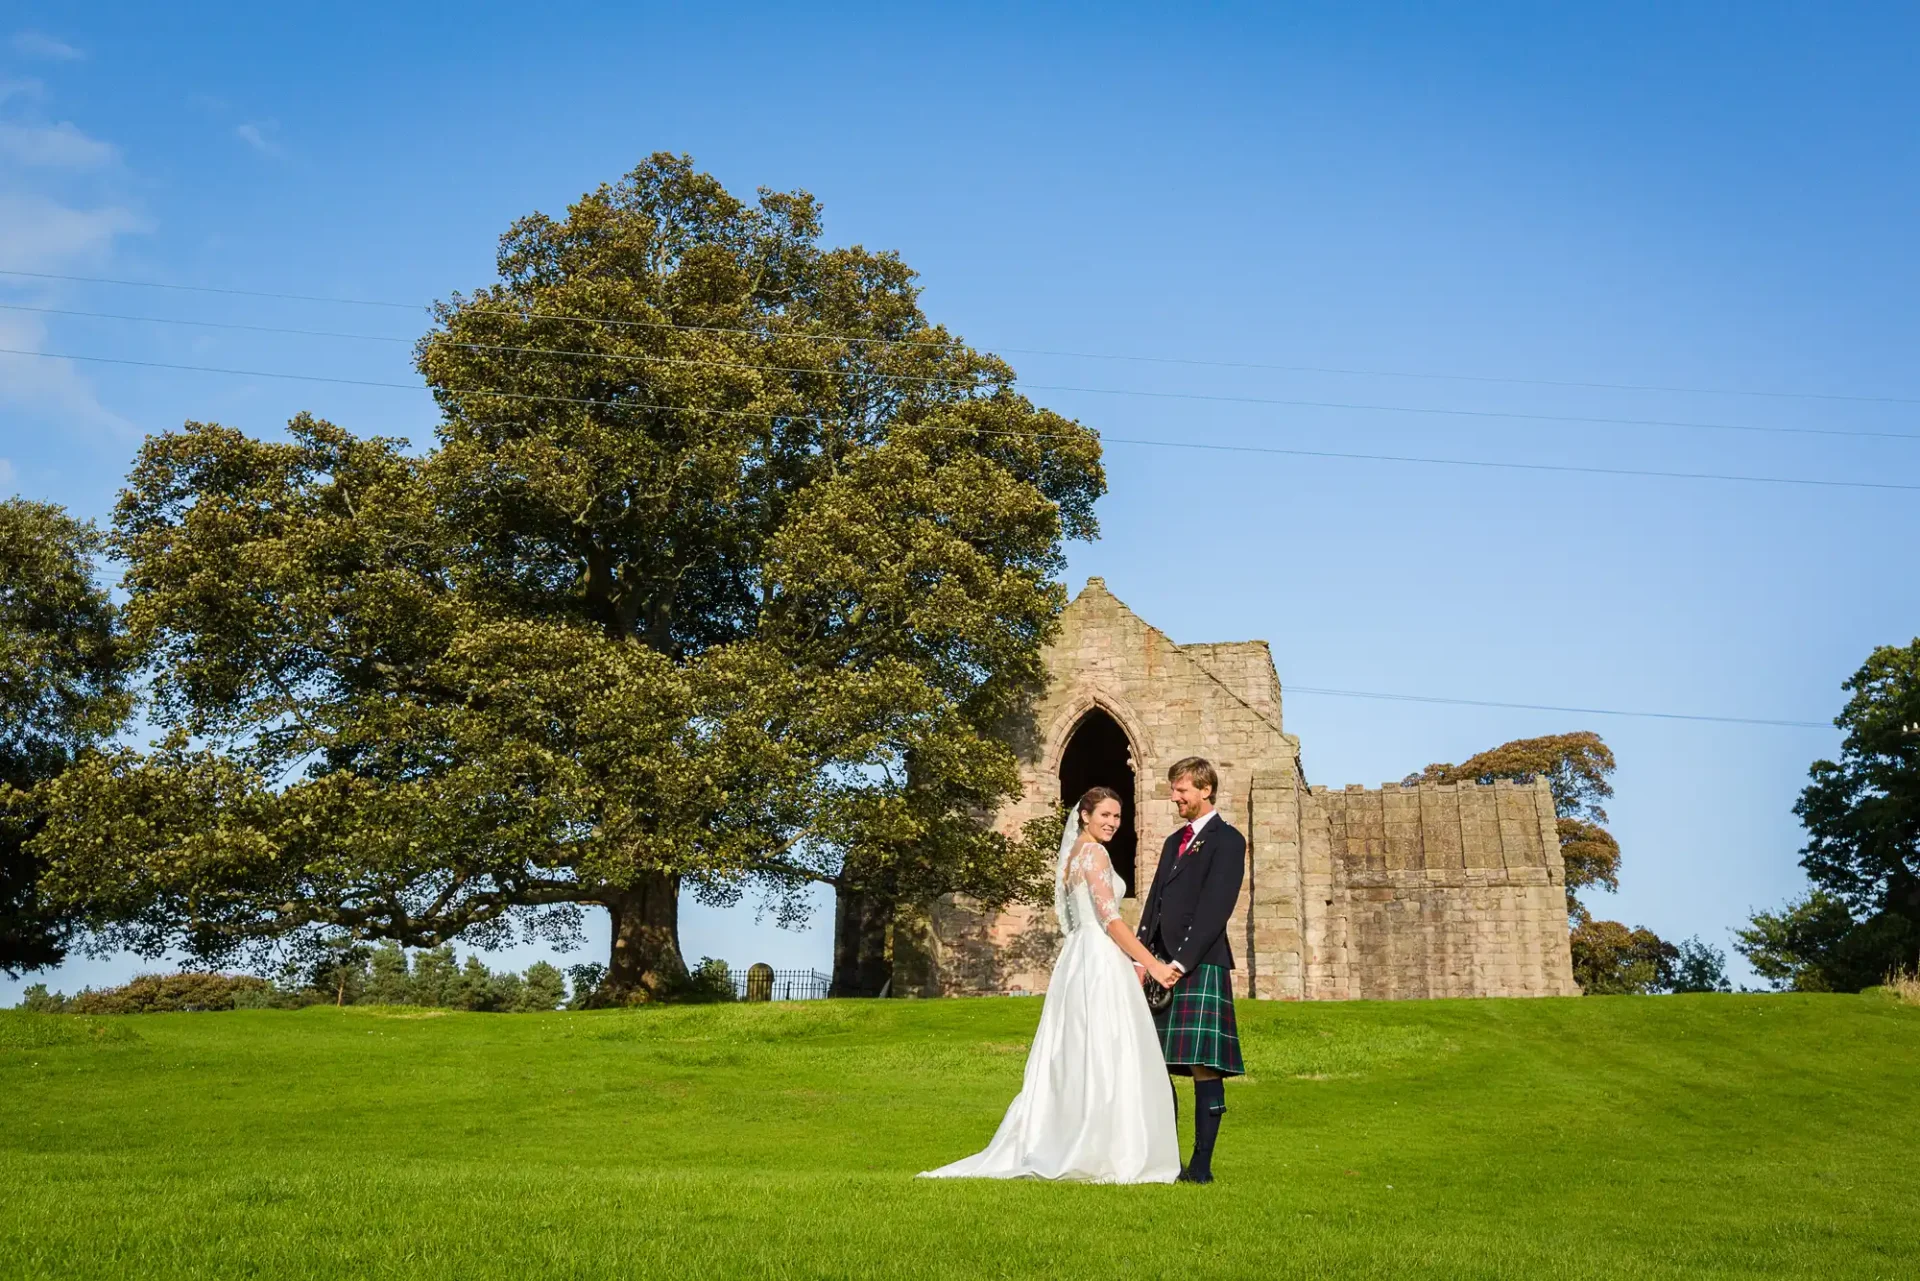 Bride in a white dress and groom in a kilt standing by a ruin under a large tree in a sunny, grassy field.